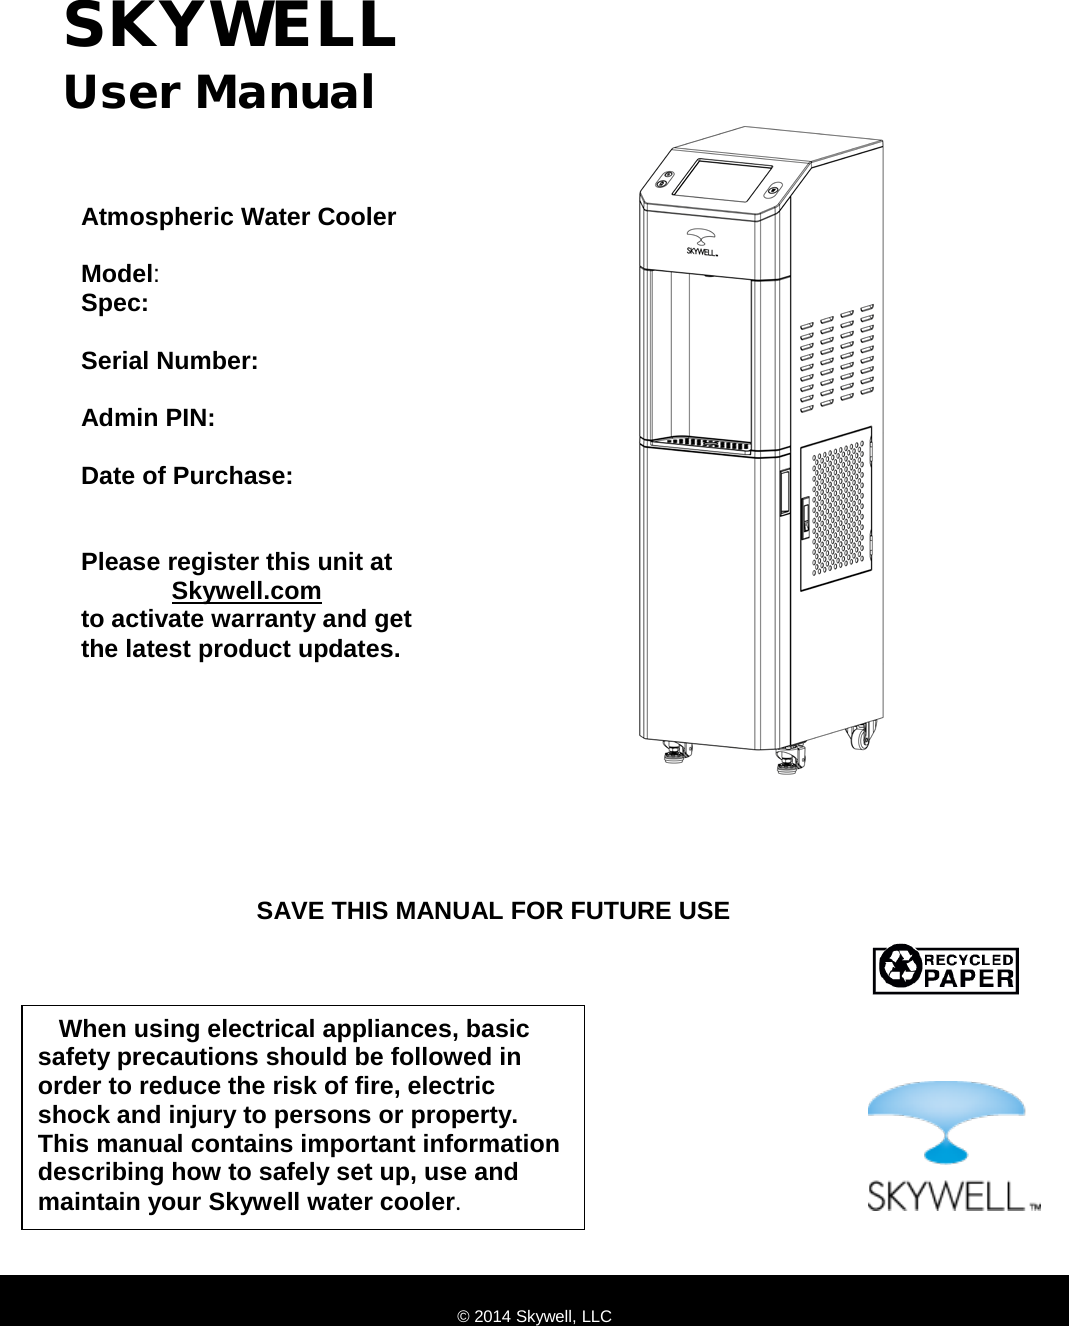                                SKYWELL User Manual Atmospheric Water Cooler   Model:   Spec:   Serial Number:  Admin PIN:  Date of Purchase:    Please register this unit at              Skywell.com to activate warranty and get  the latest product updates. © 2014 Skywell, LLC    When using electrical appliances, basic safety precautions should be followed in order to reduce the risk of fire, electric shock and injury to persons or property. This manual contains important information describing how to safely set up, use and maintain your Skywell water cooler. SAVE THIS MANUAL FOR FUTURE USE 